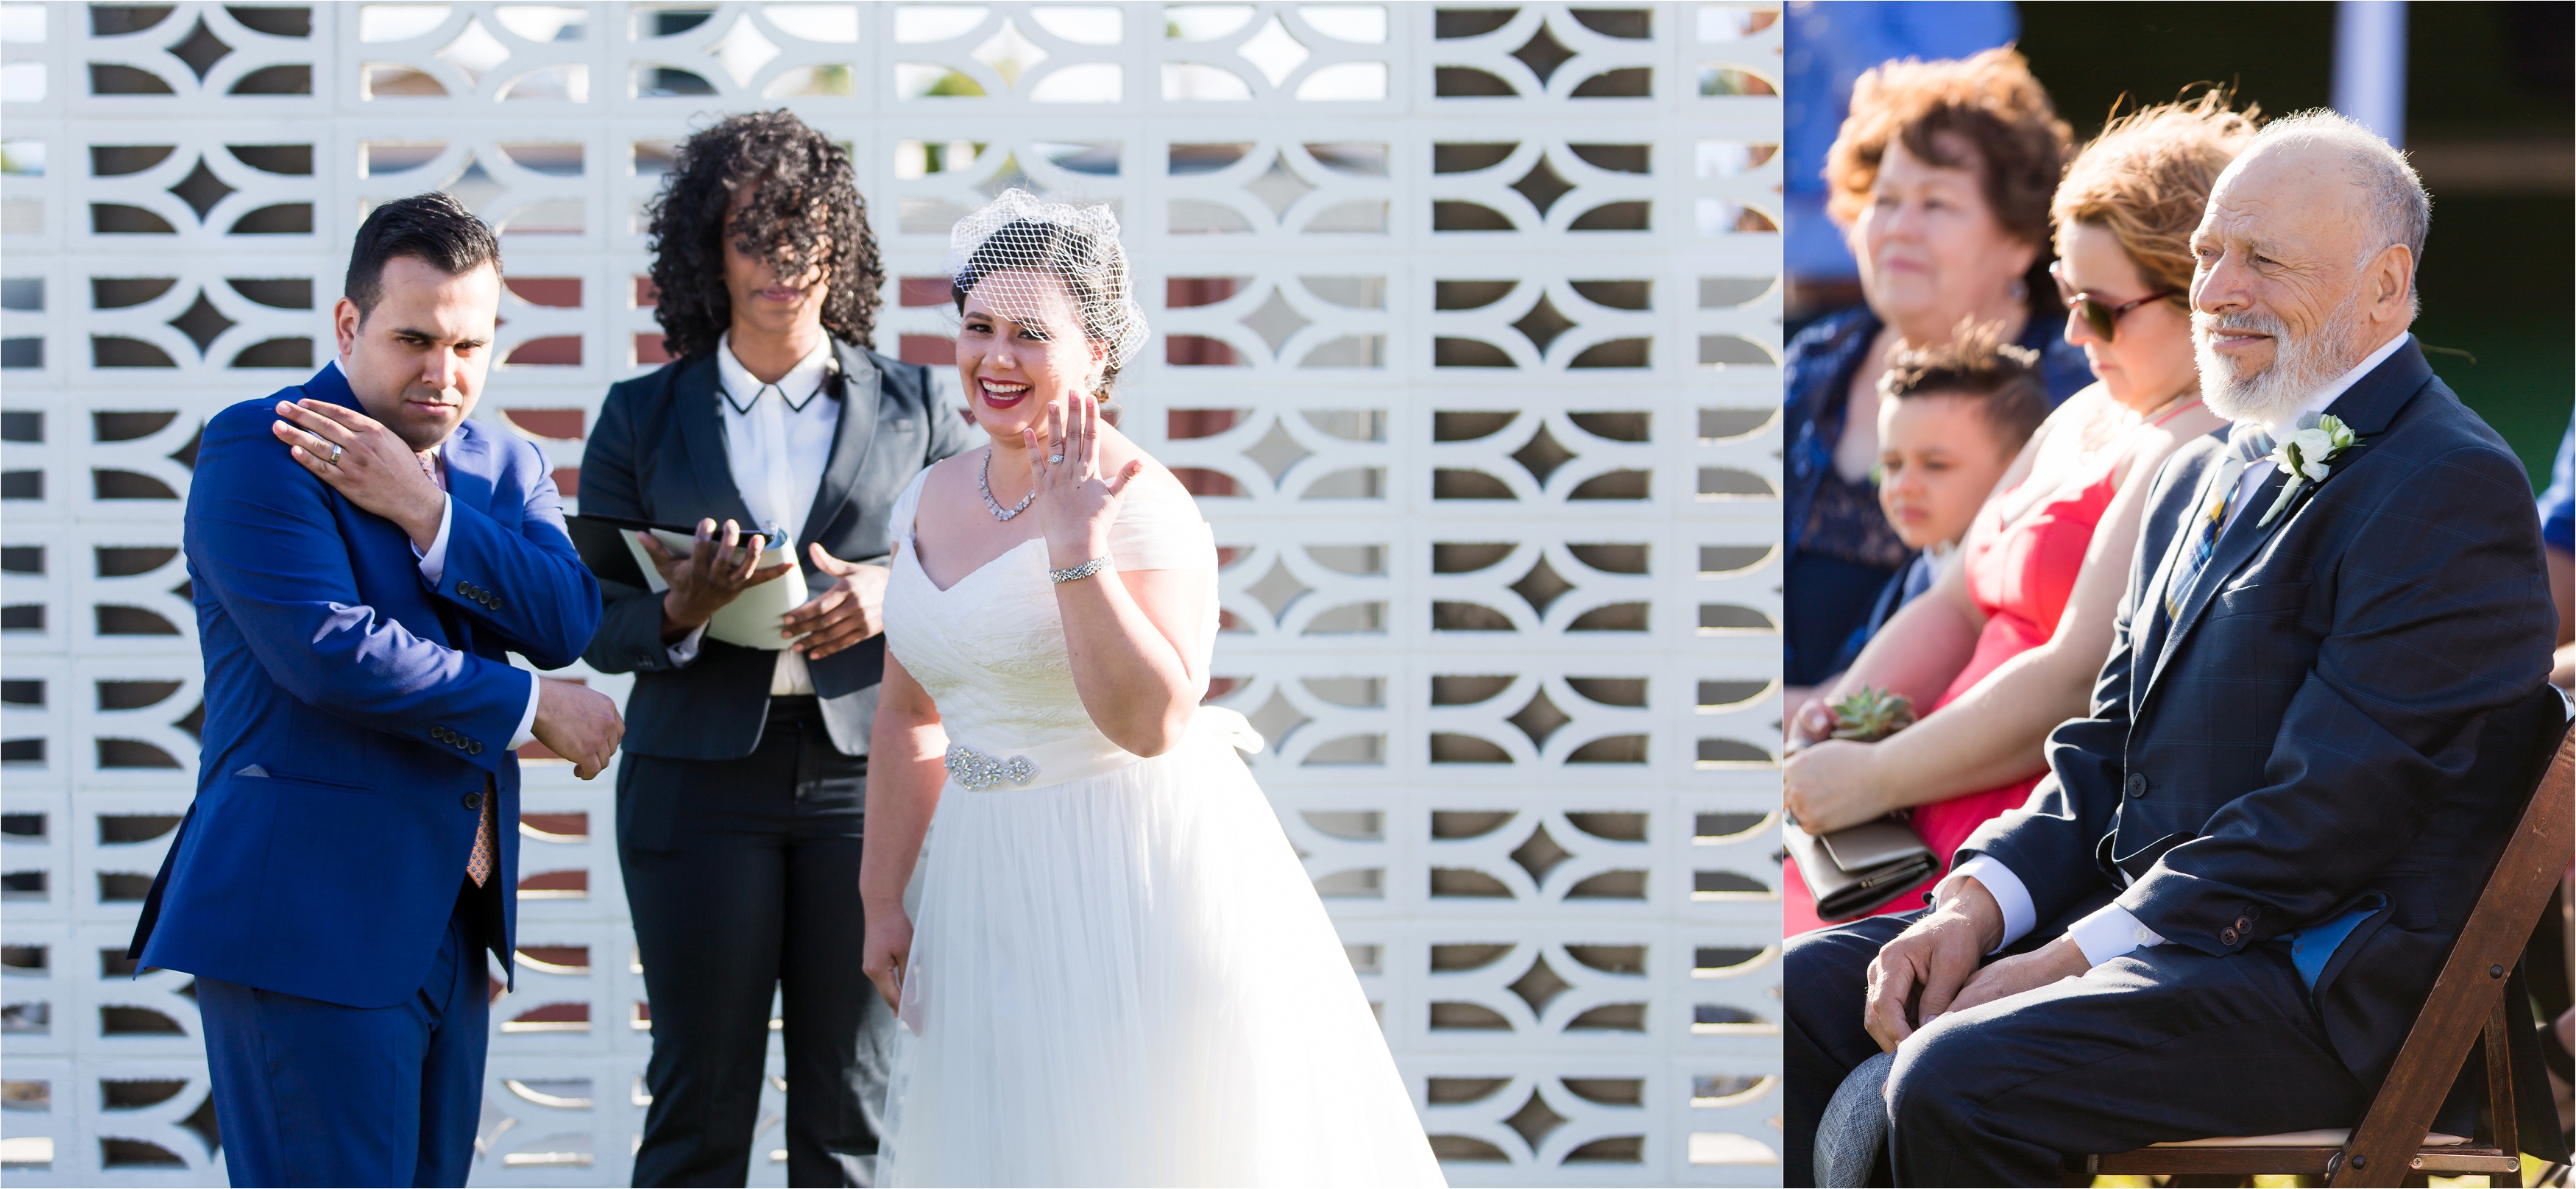 Couple shows off wedding rings during Palm Springs wedding ceremony